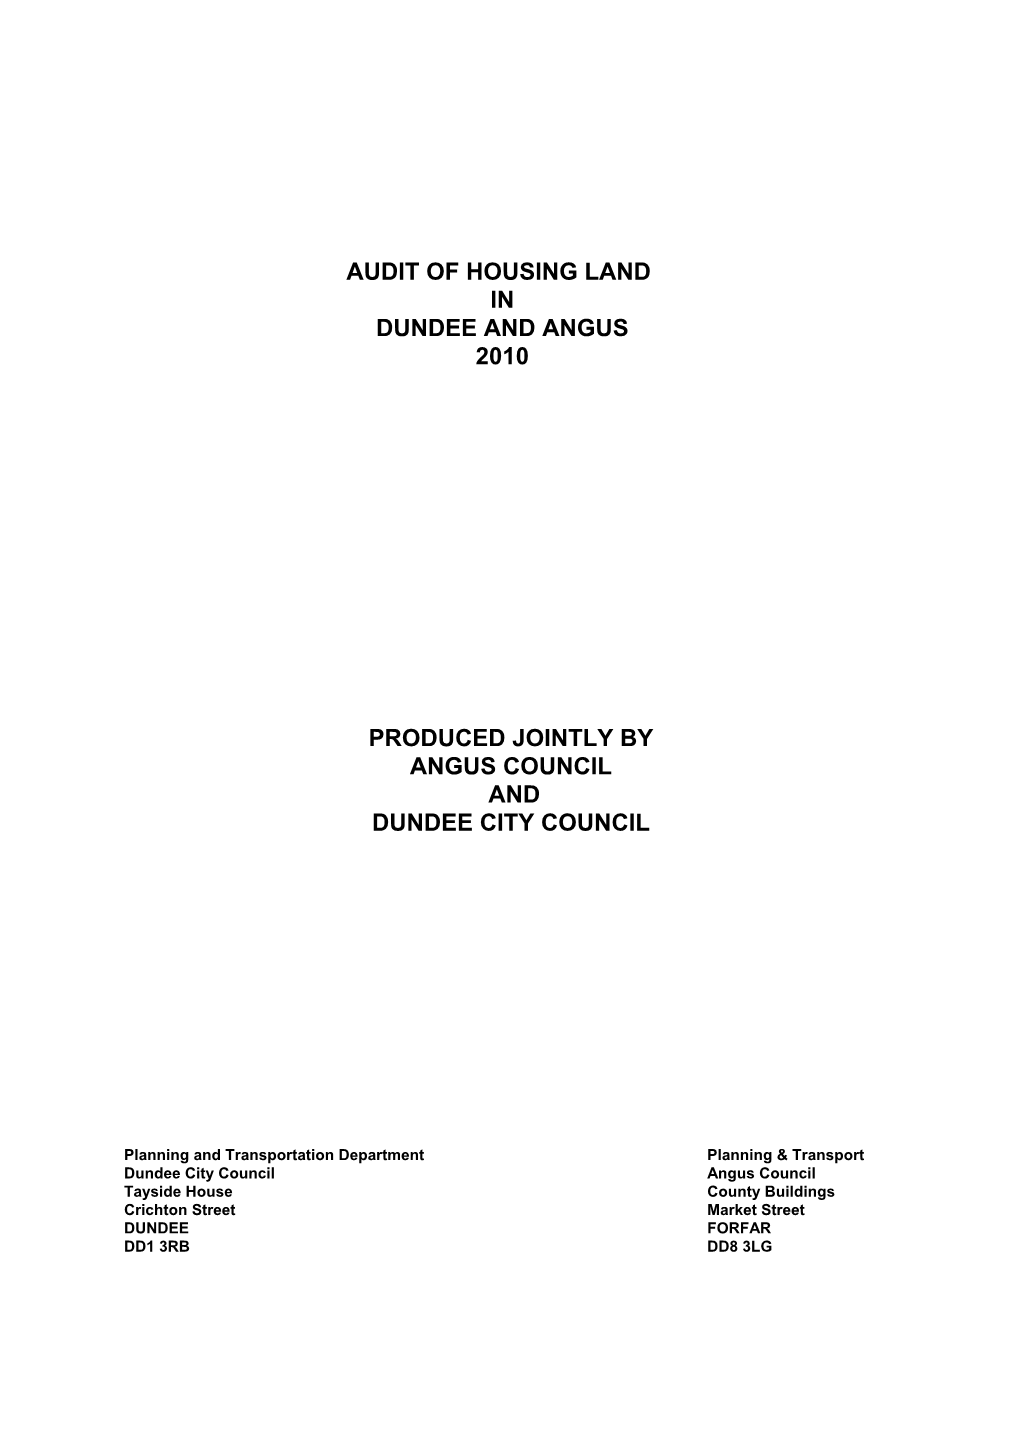 Dundee and Angus Housing Land Audit 2010